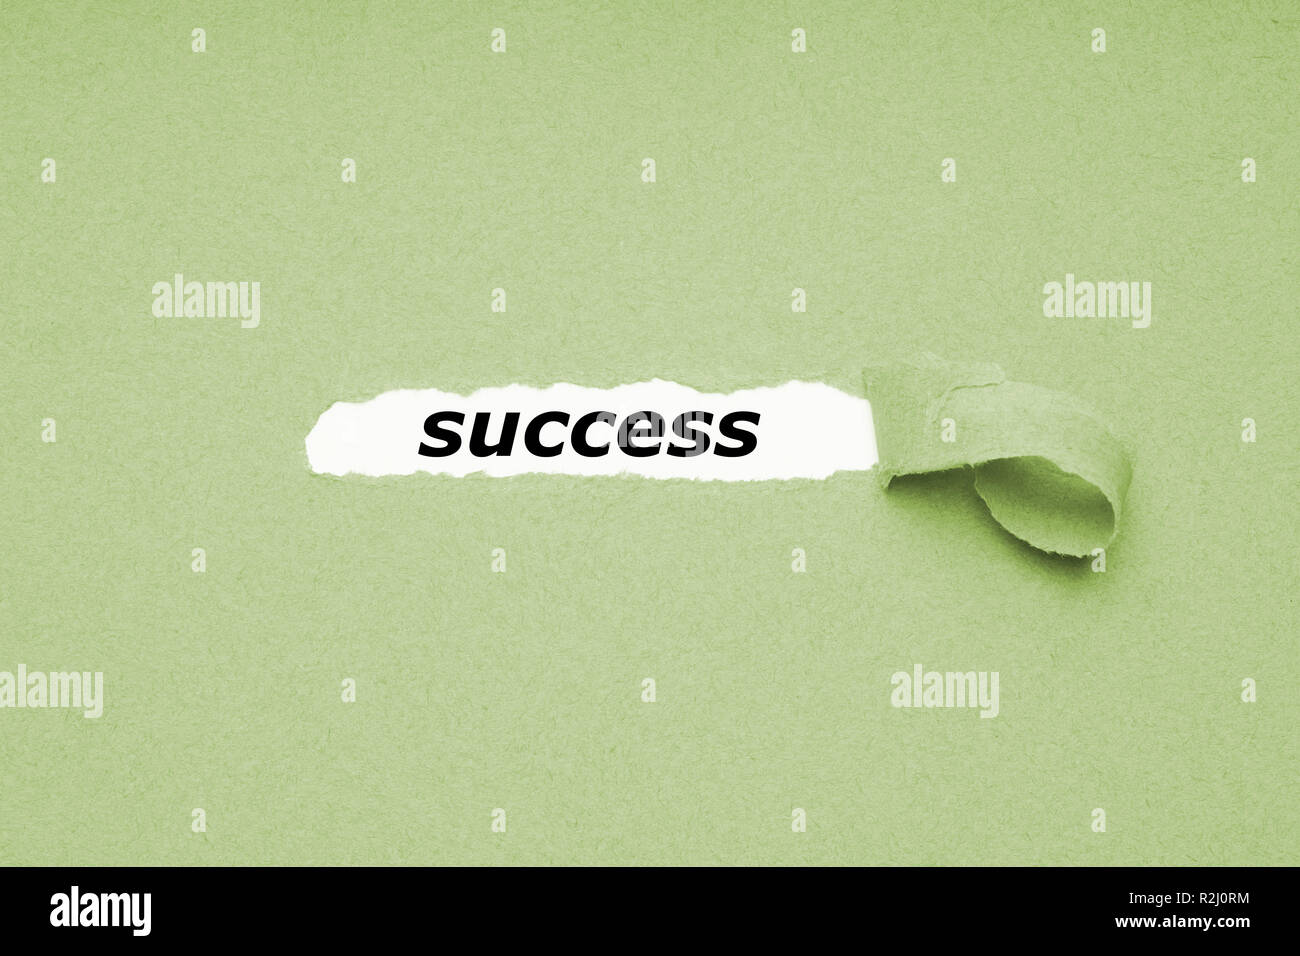 finding success concept - hole in paper background revealing hidden text Stock Photo